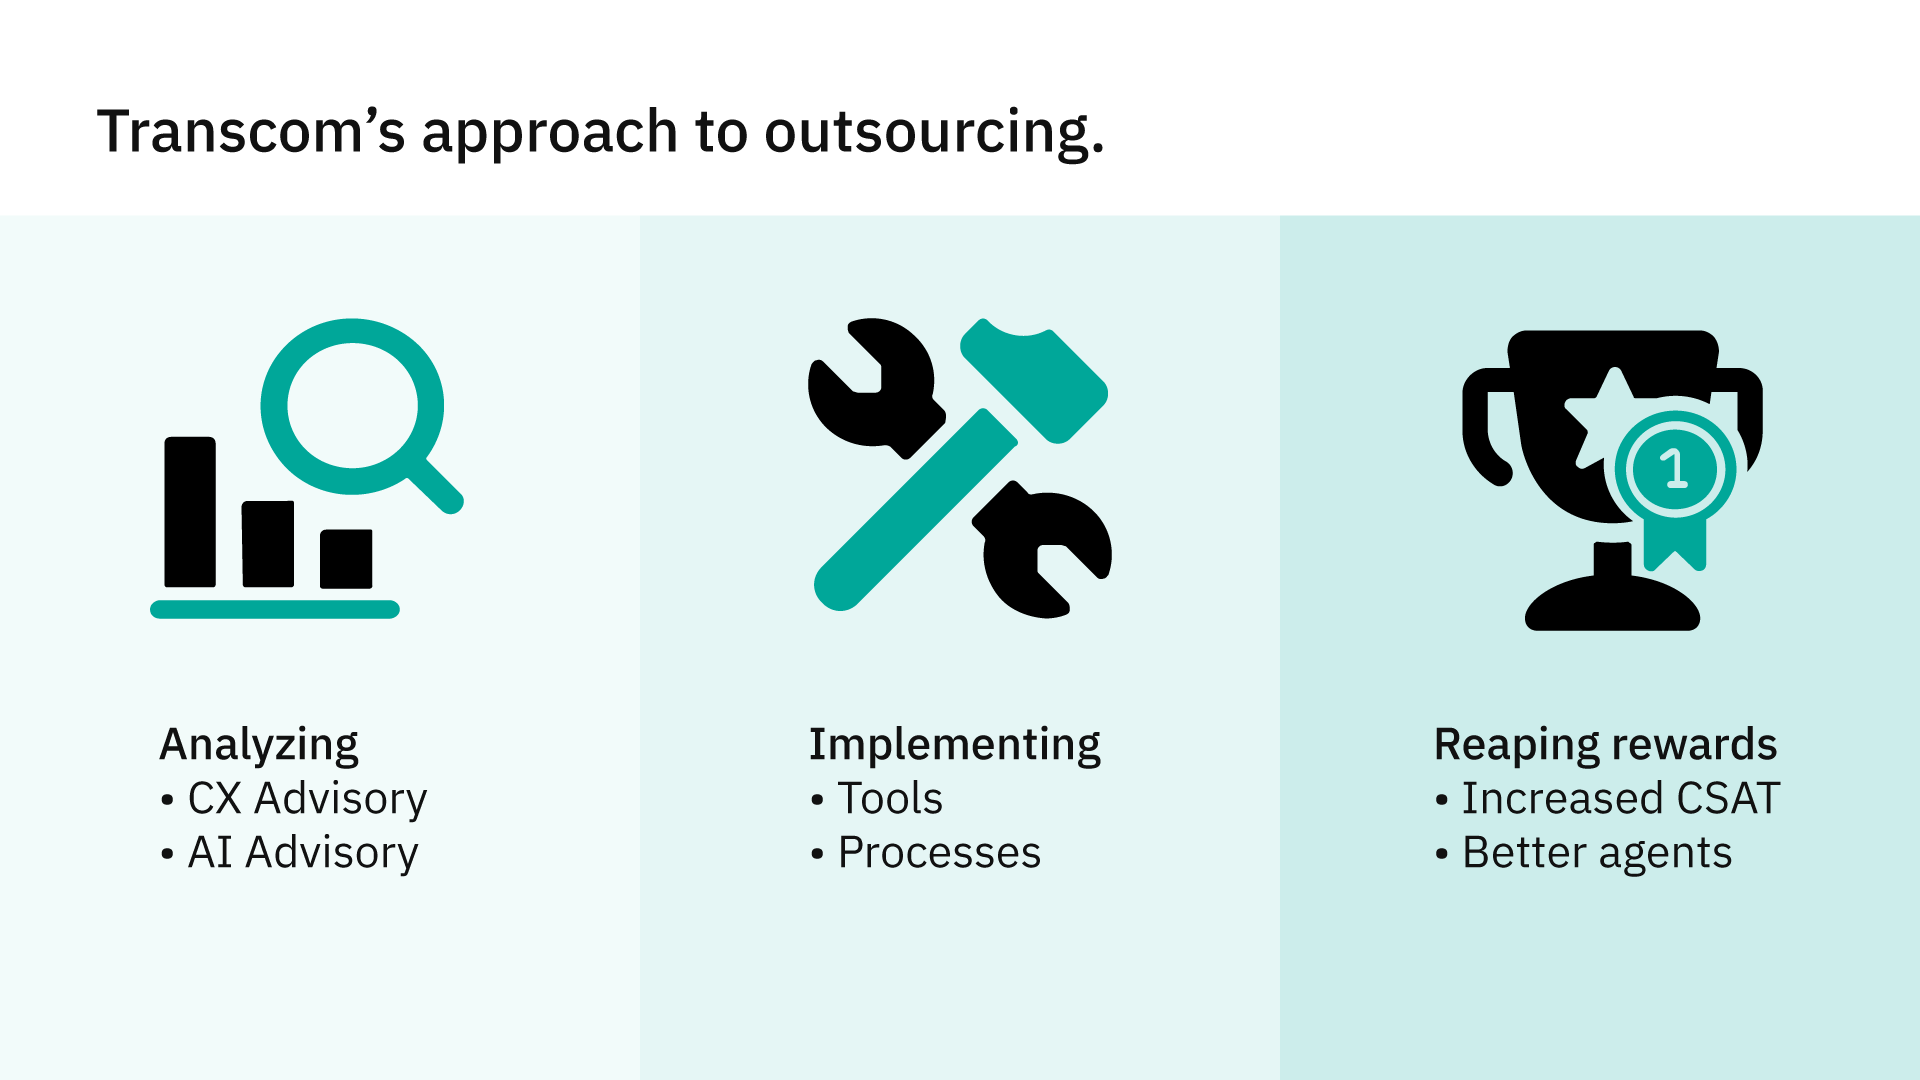 Transcom's approach to outsourcing.